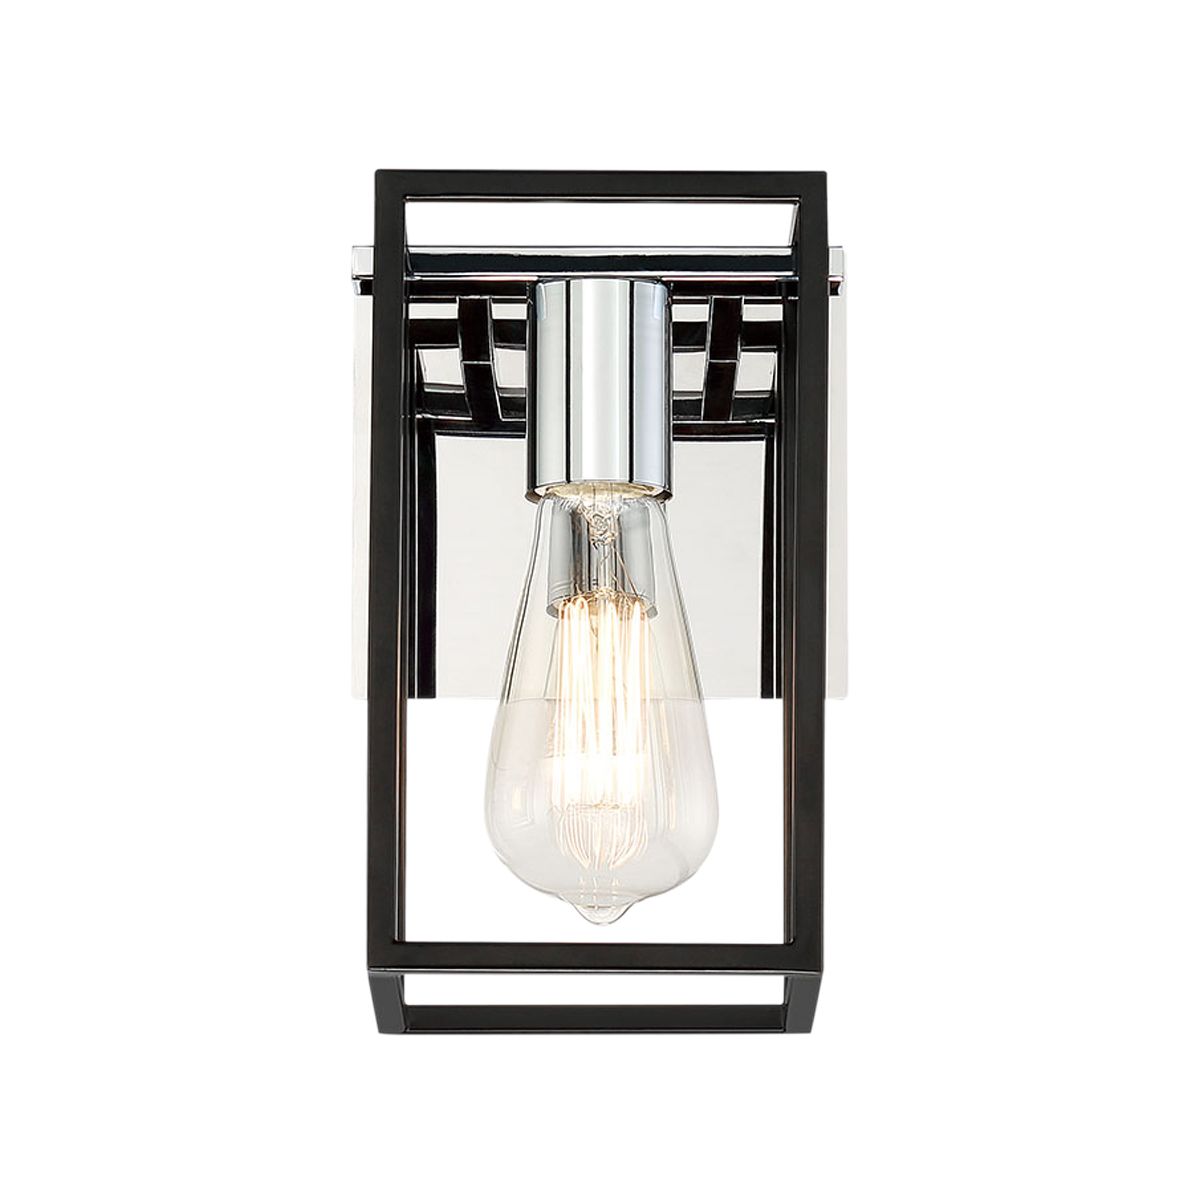 Stafford 9 in. Armed Sconce Chrome and Black finish